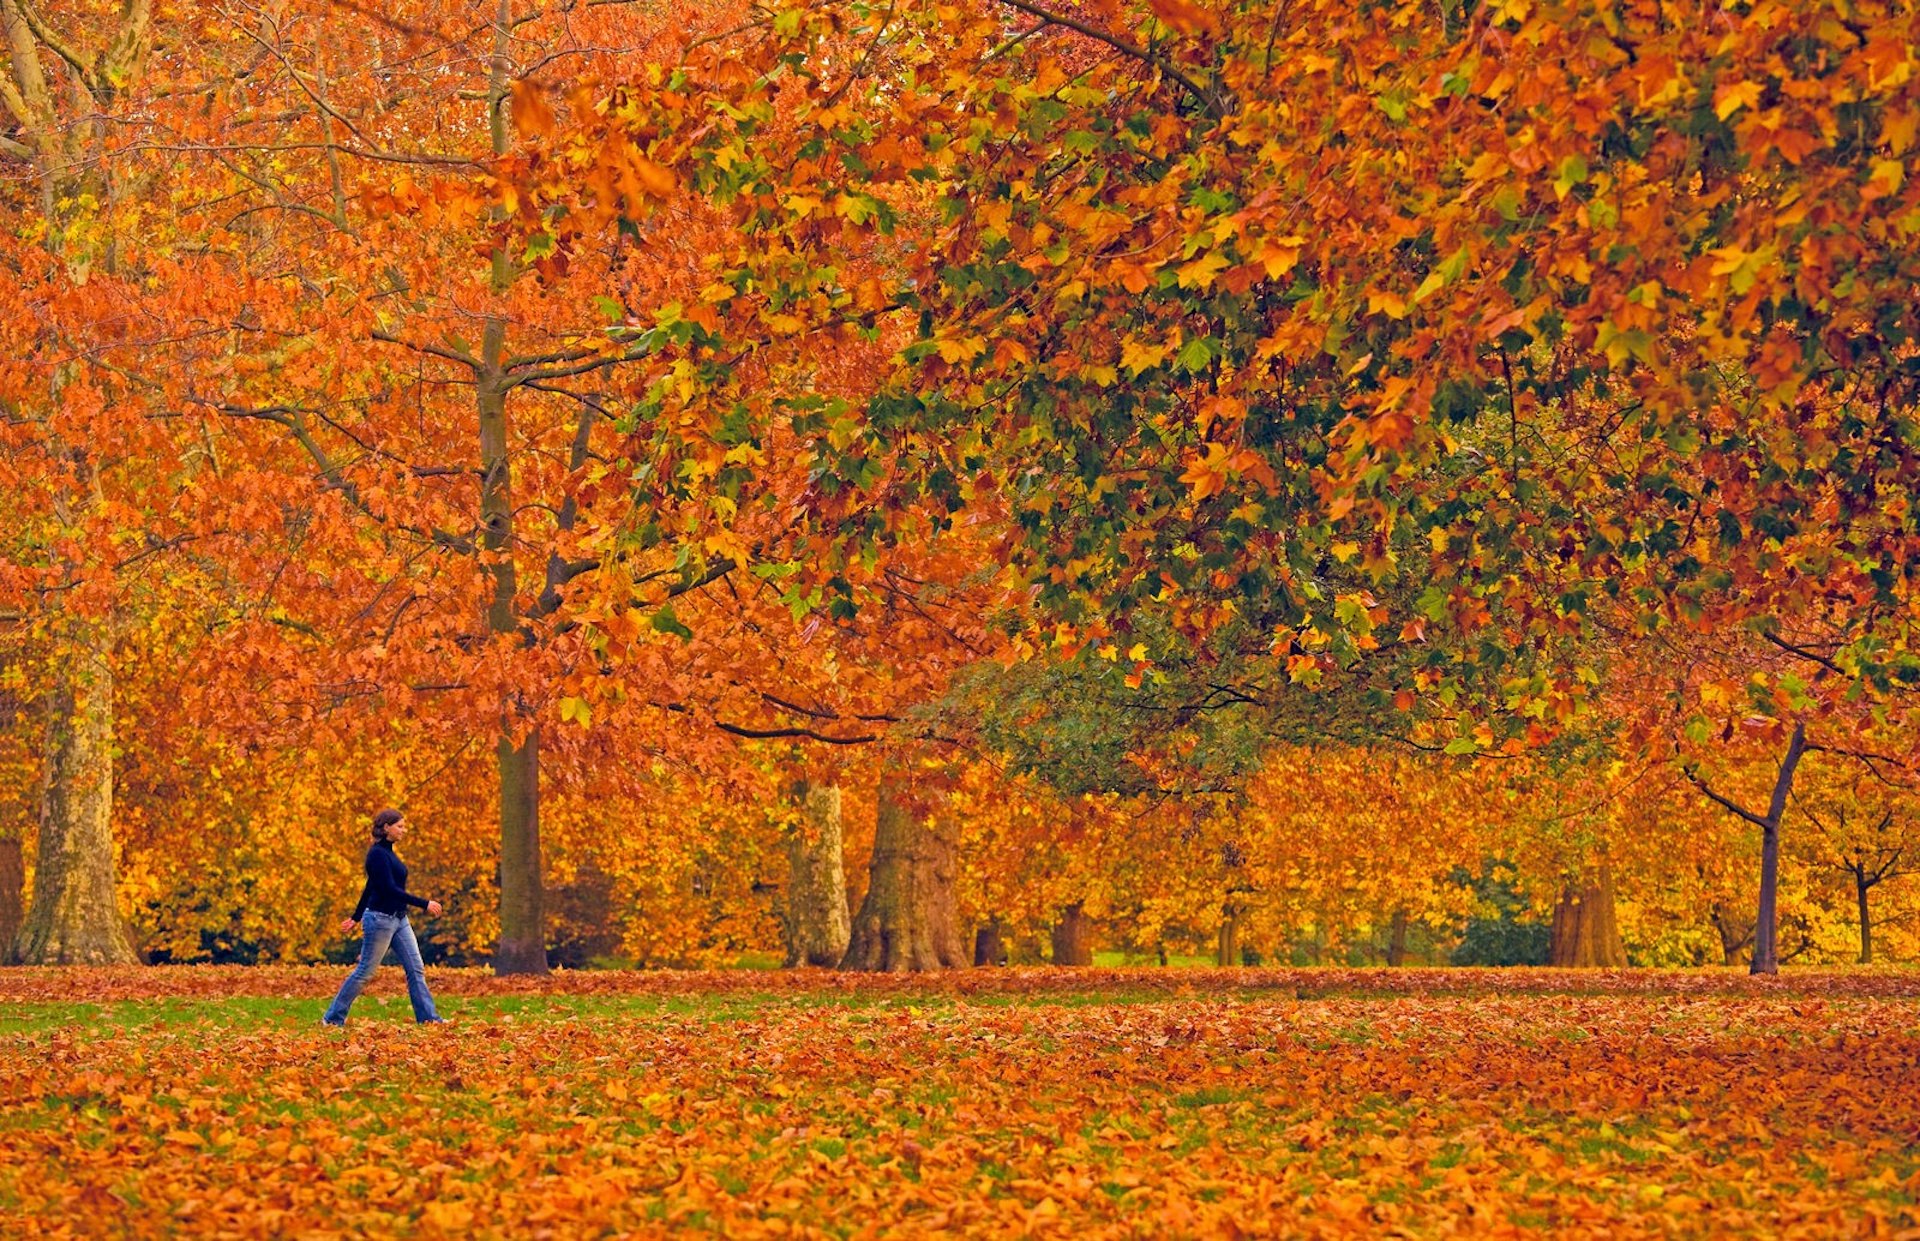 A woman walks through a park filled with brightly coloured orange leaves; London